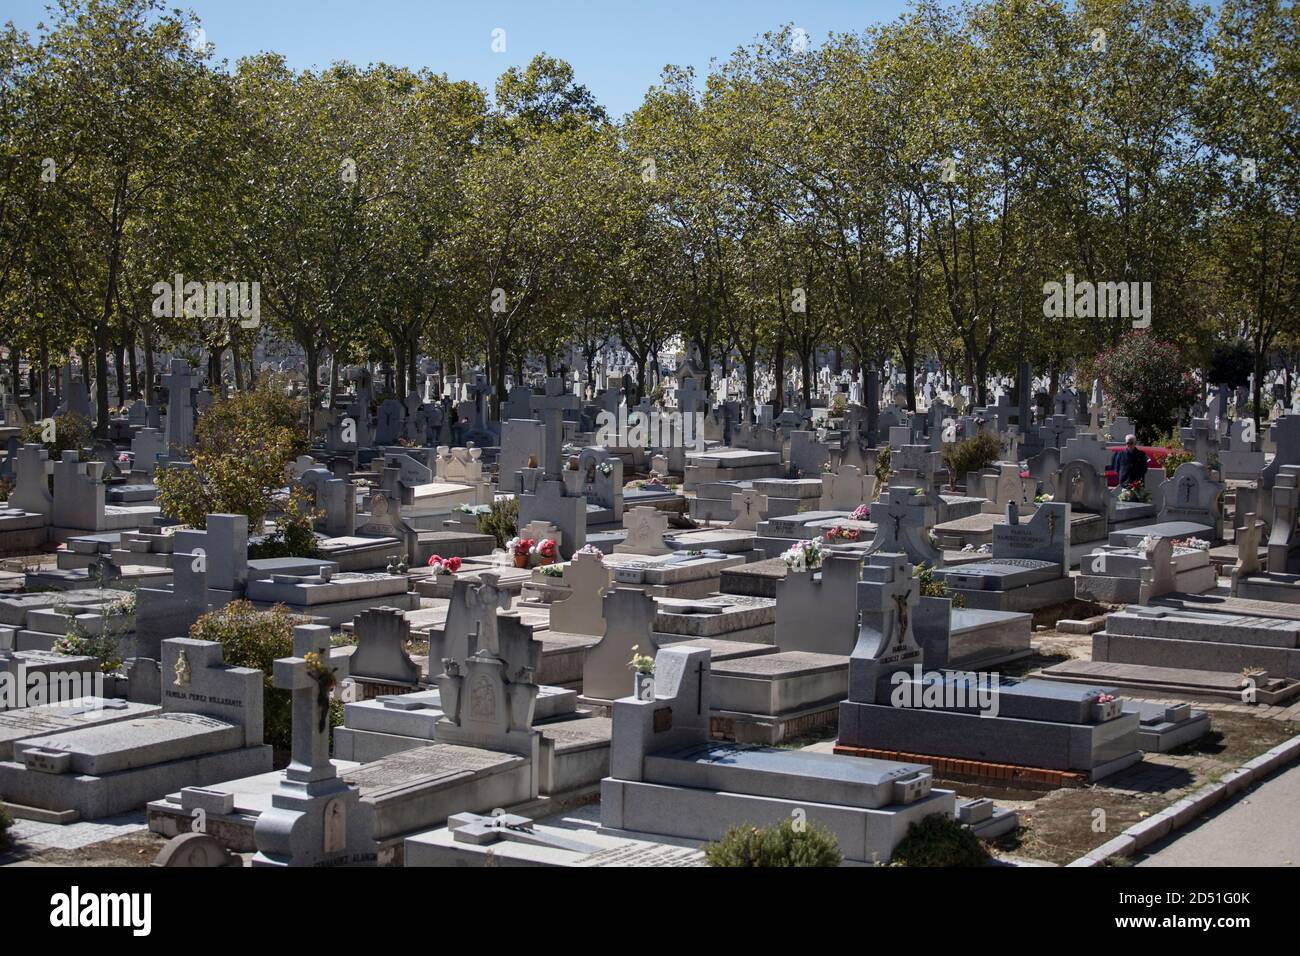 Madrid, Spain. 12th Oct, 2020. A view of a part of the Almudena cemetery on the Spanish National Day. Spain is currently struggling with a particularly violent second corona wave and has the highest infection rates in Western Europe. Credit: Javier Carbajal/dpa/Alamy Live News Stock Photo